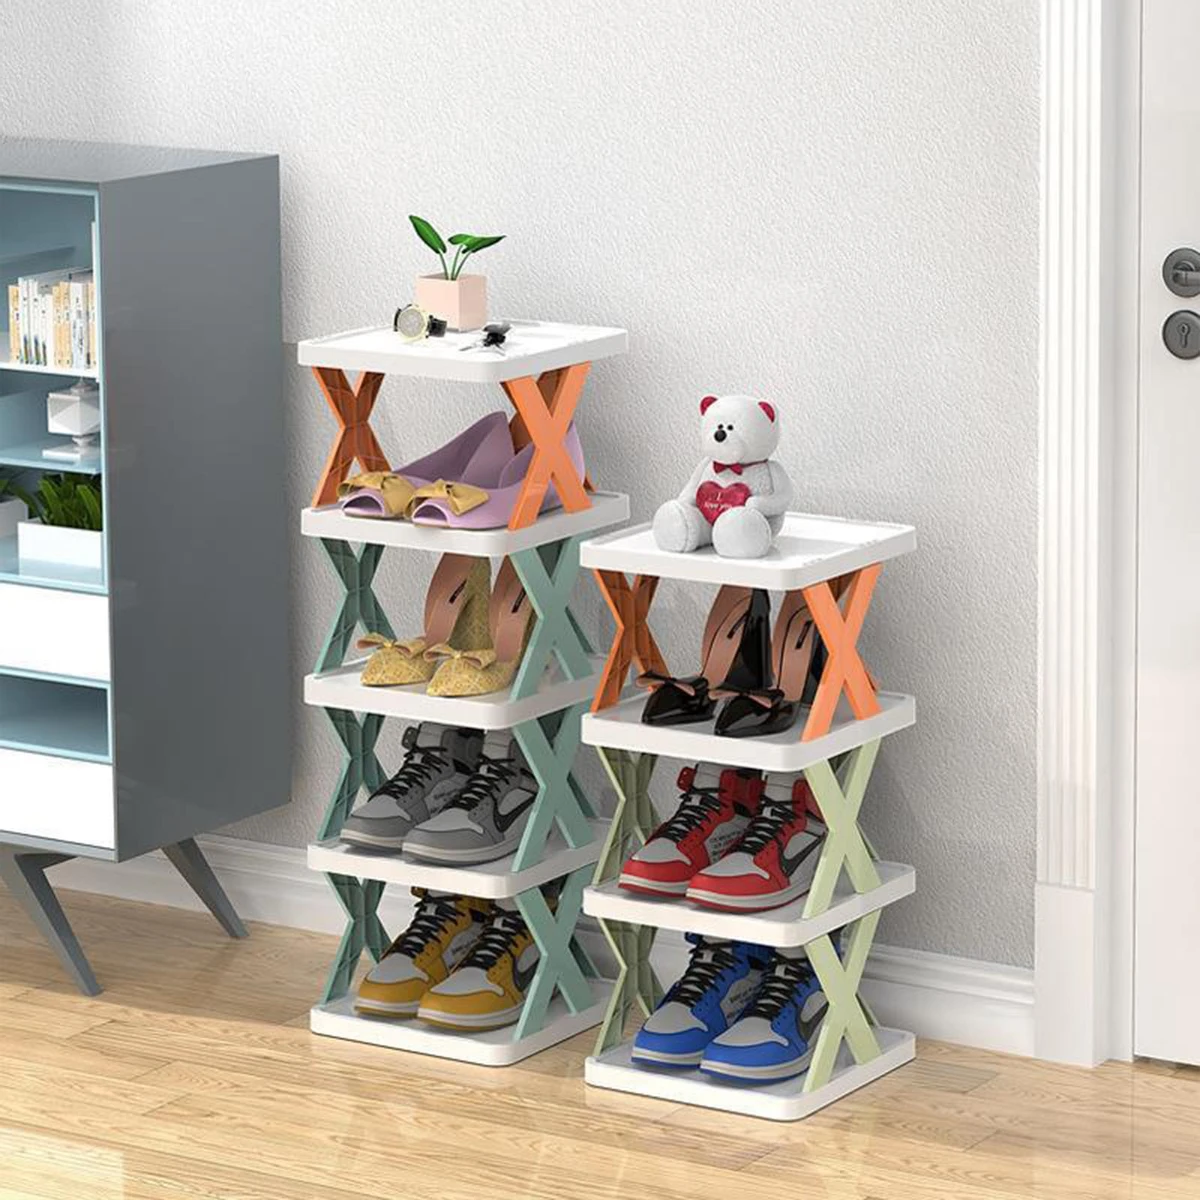 5 Layer Multi-Layer Book and Shoe Rack